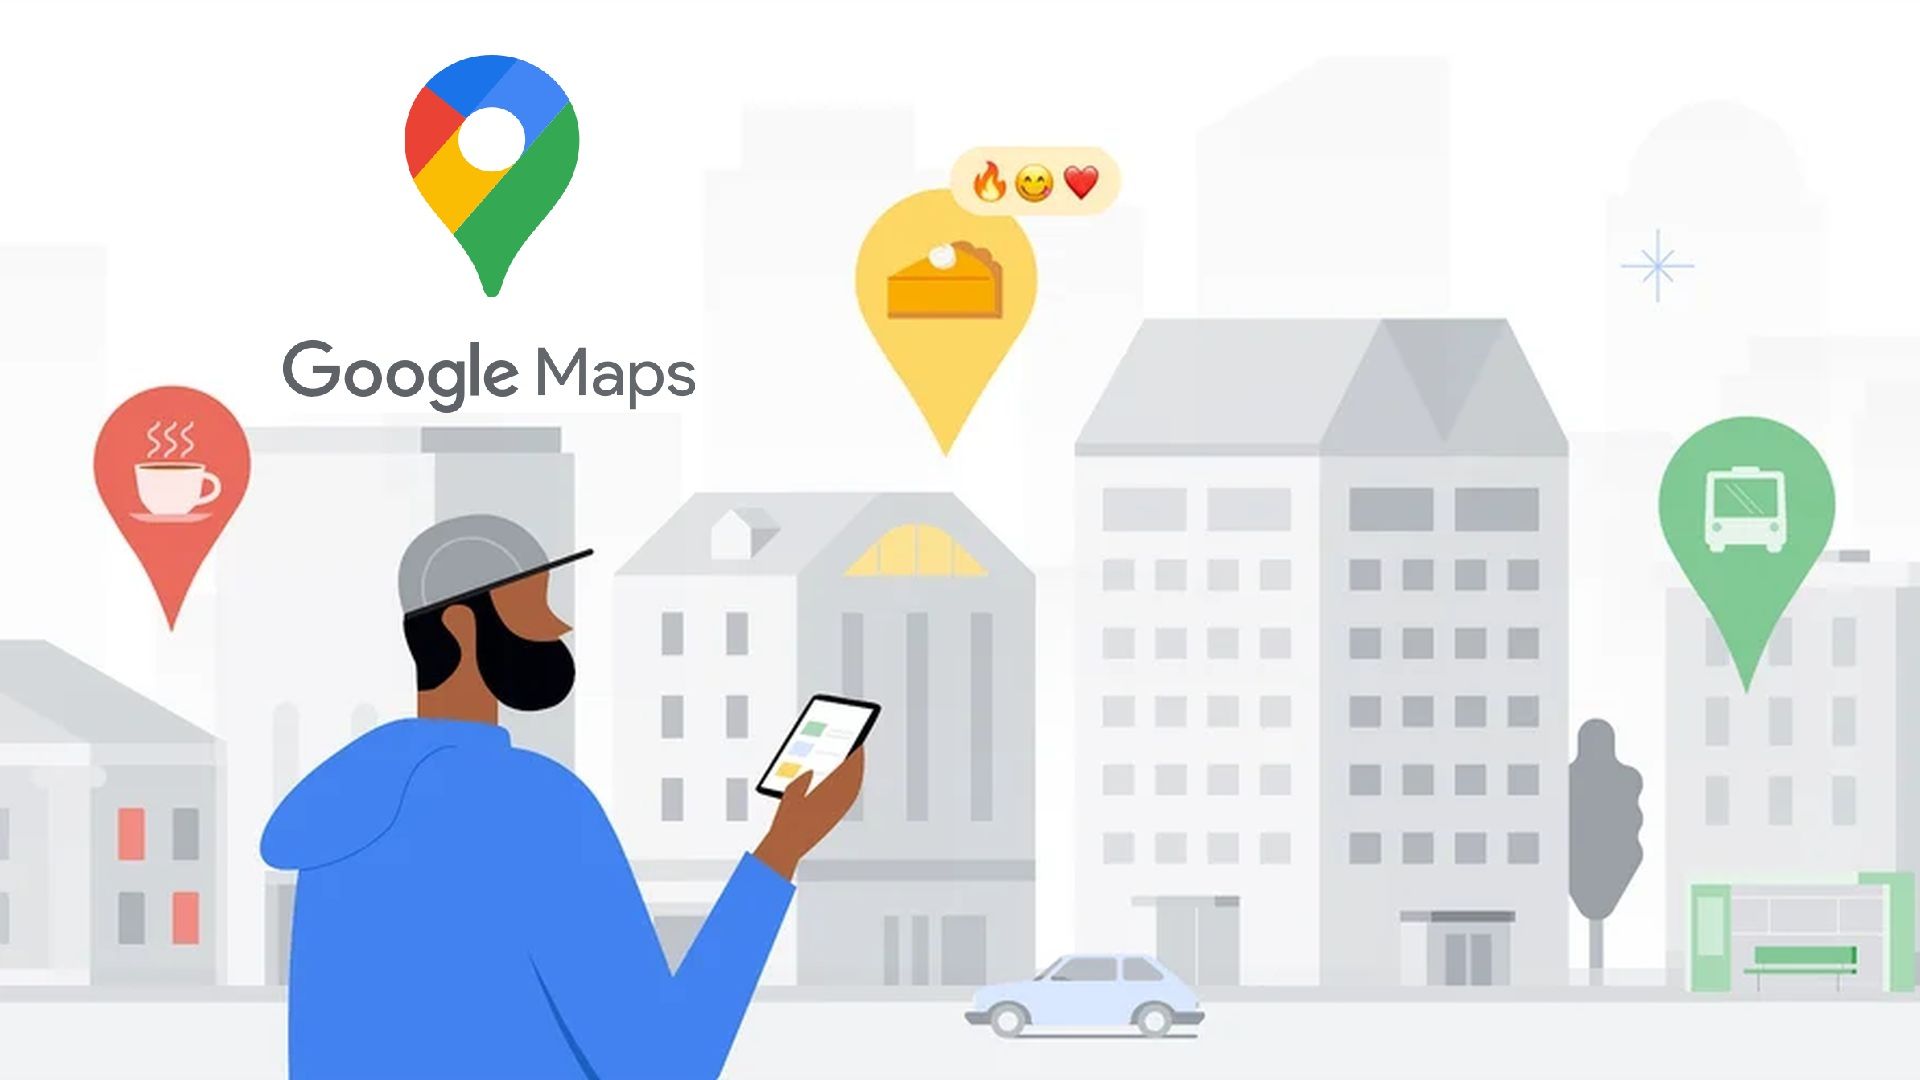 An illustration of a person using Google Maps on their phone